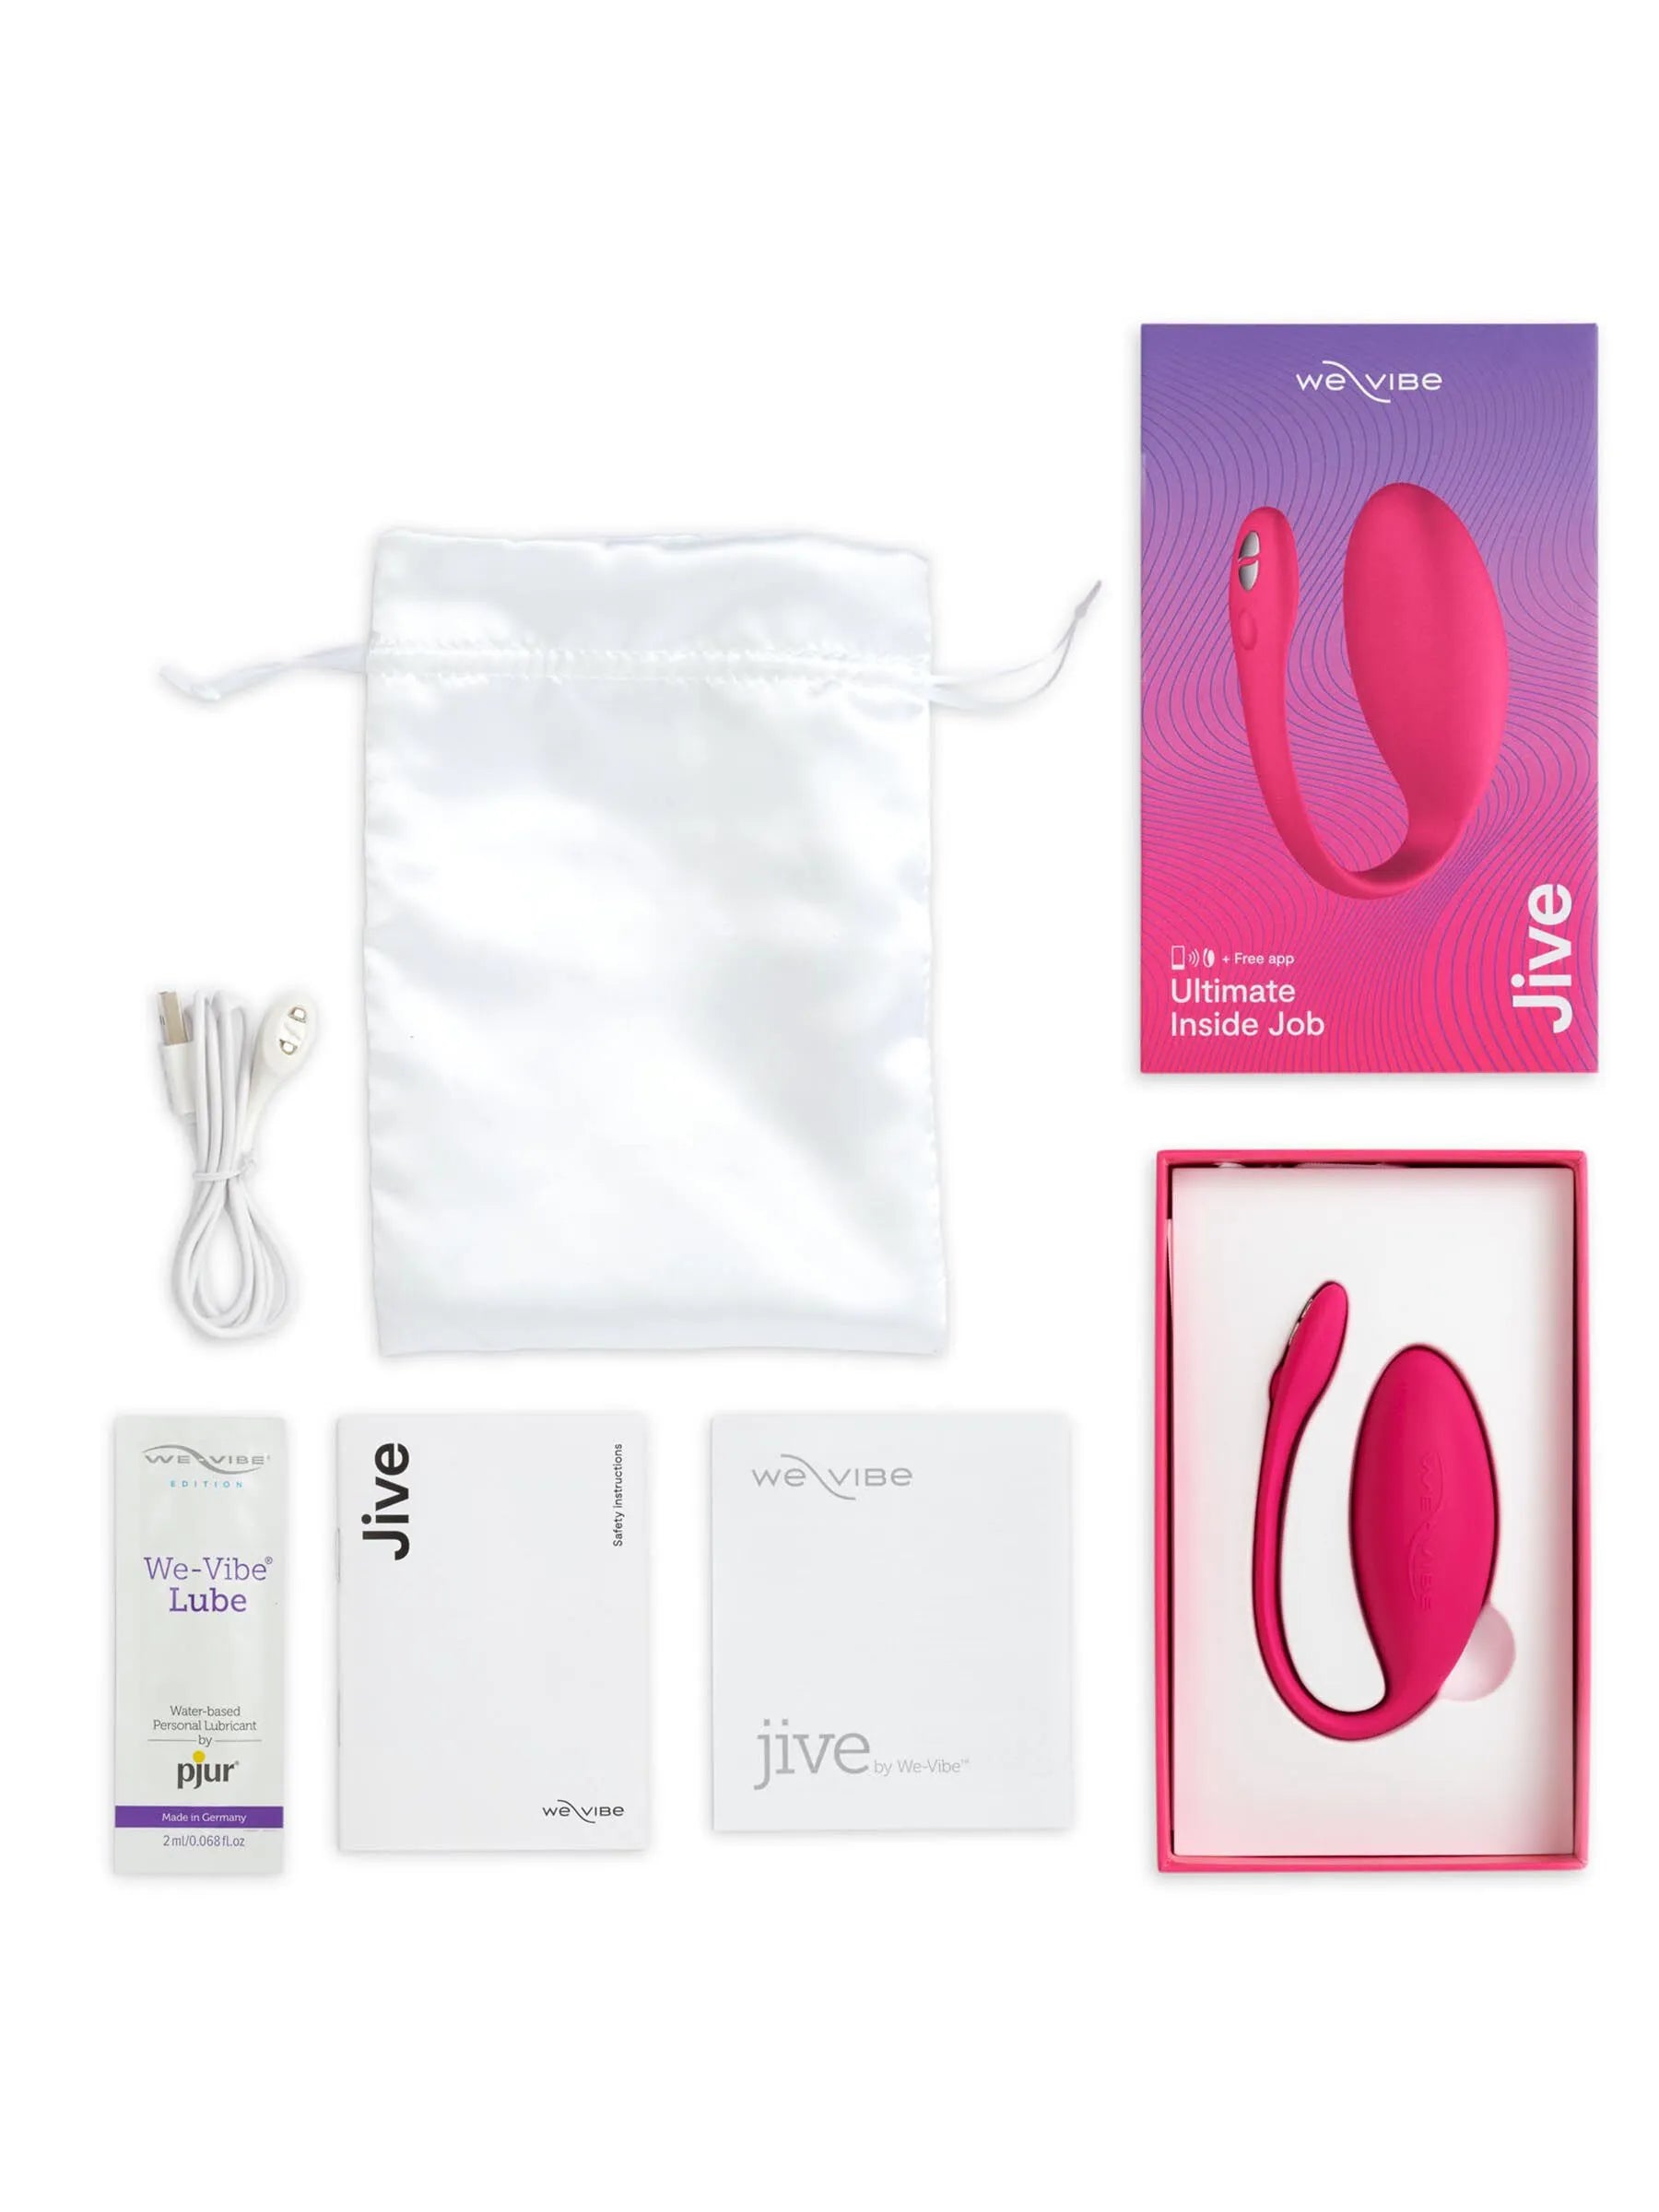 We Vibe Jive Vibrator From Ann Summers, Image 04